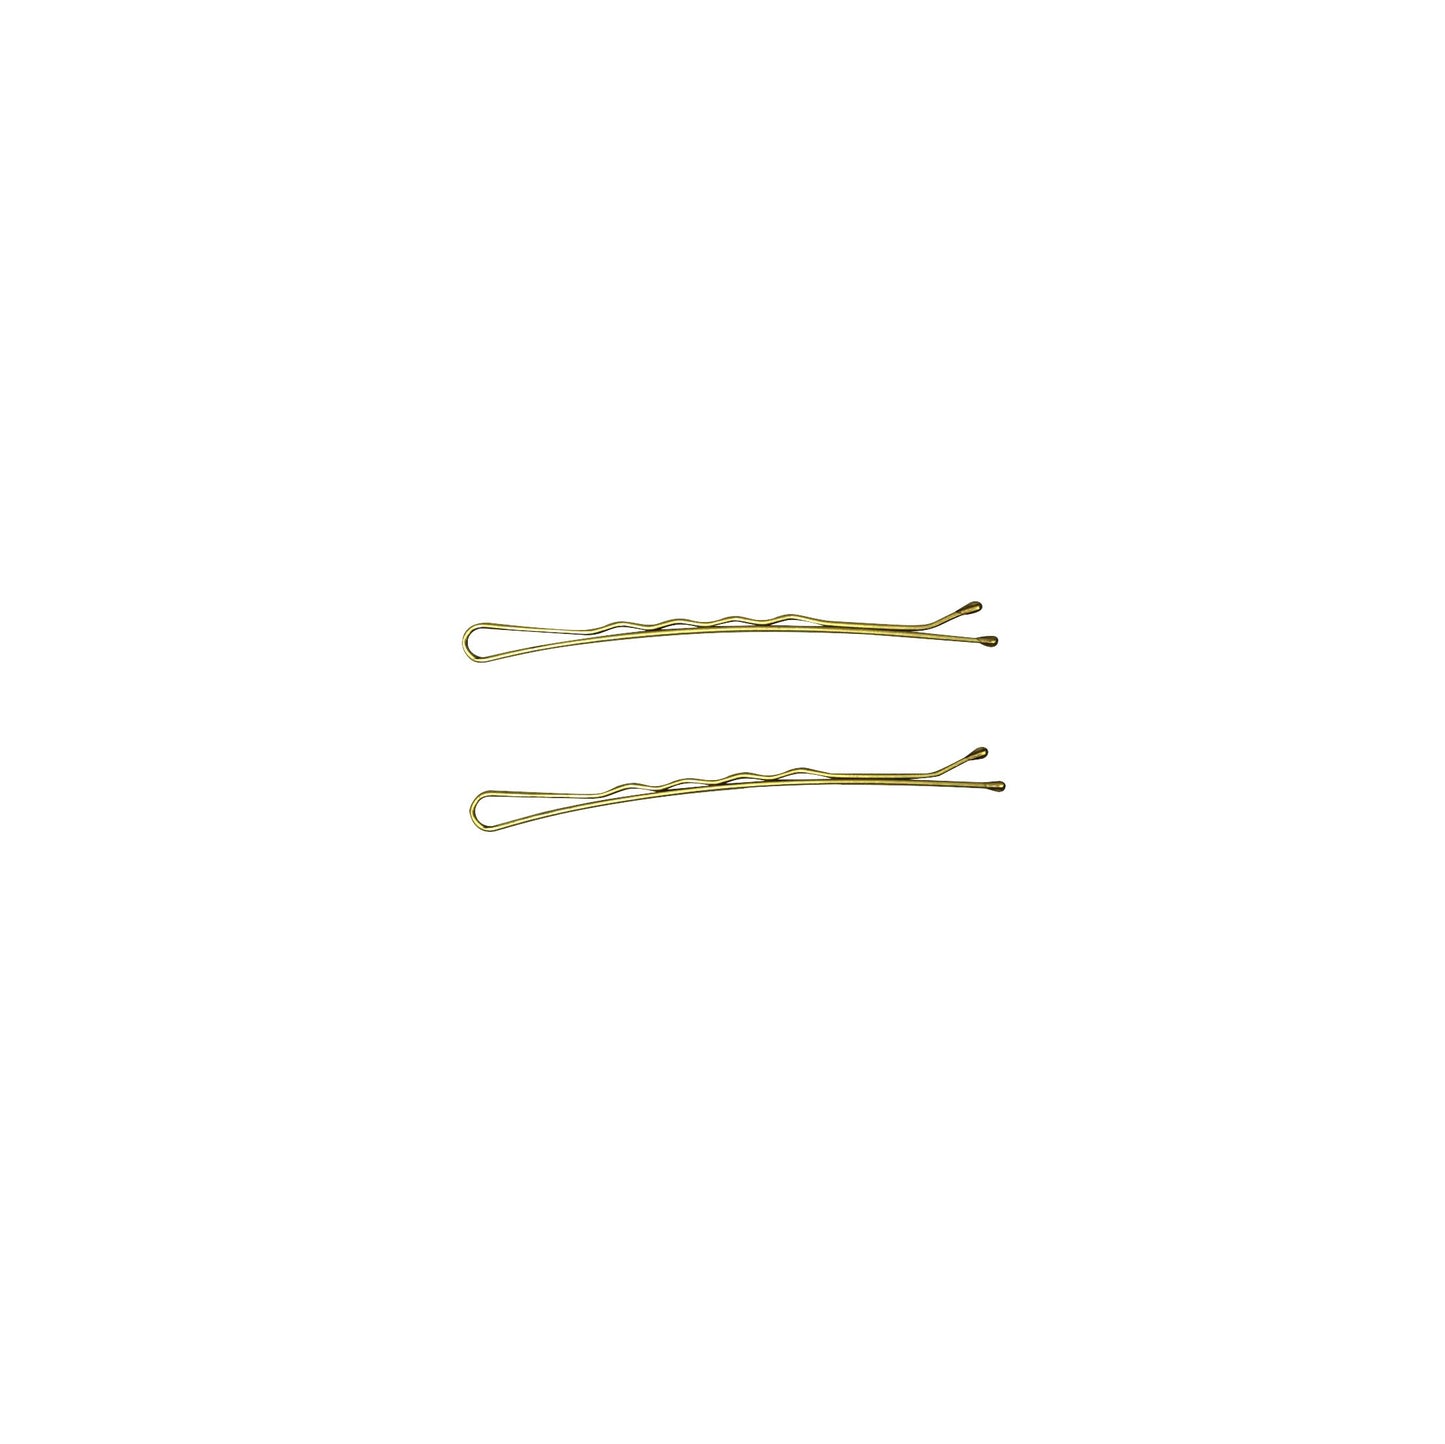 280, Brassed Color, 2.4in (6.0cm), Italian Made Bobby Pins, Recloseable Stay Clean and Organized Container